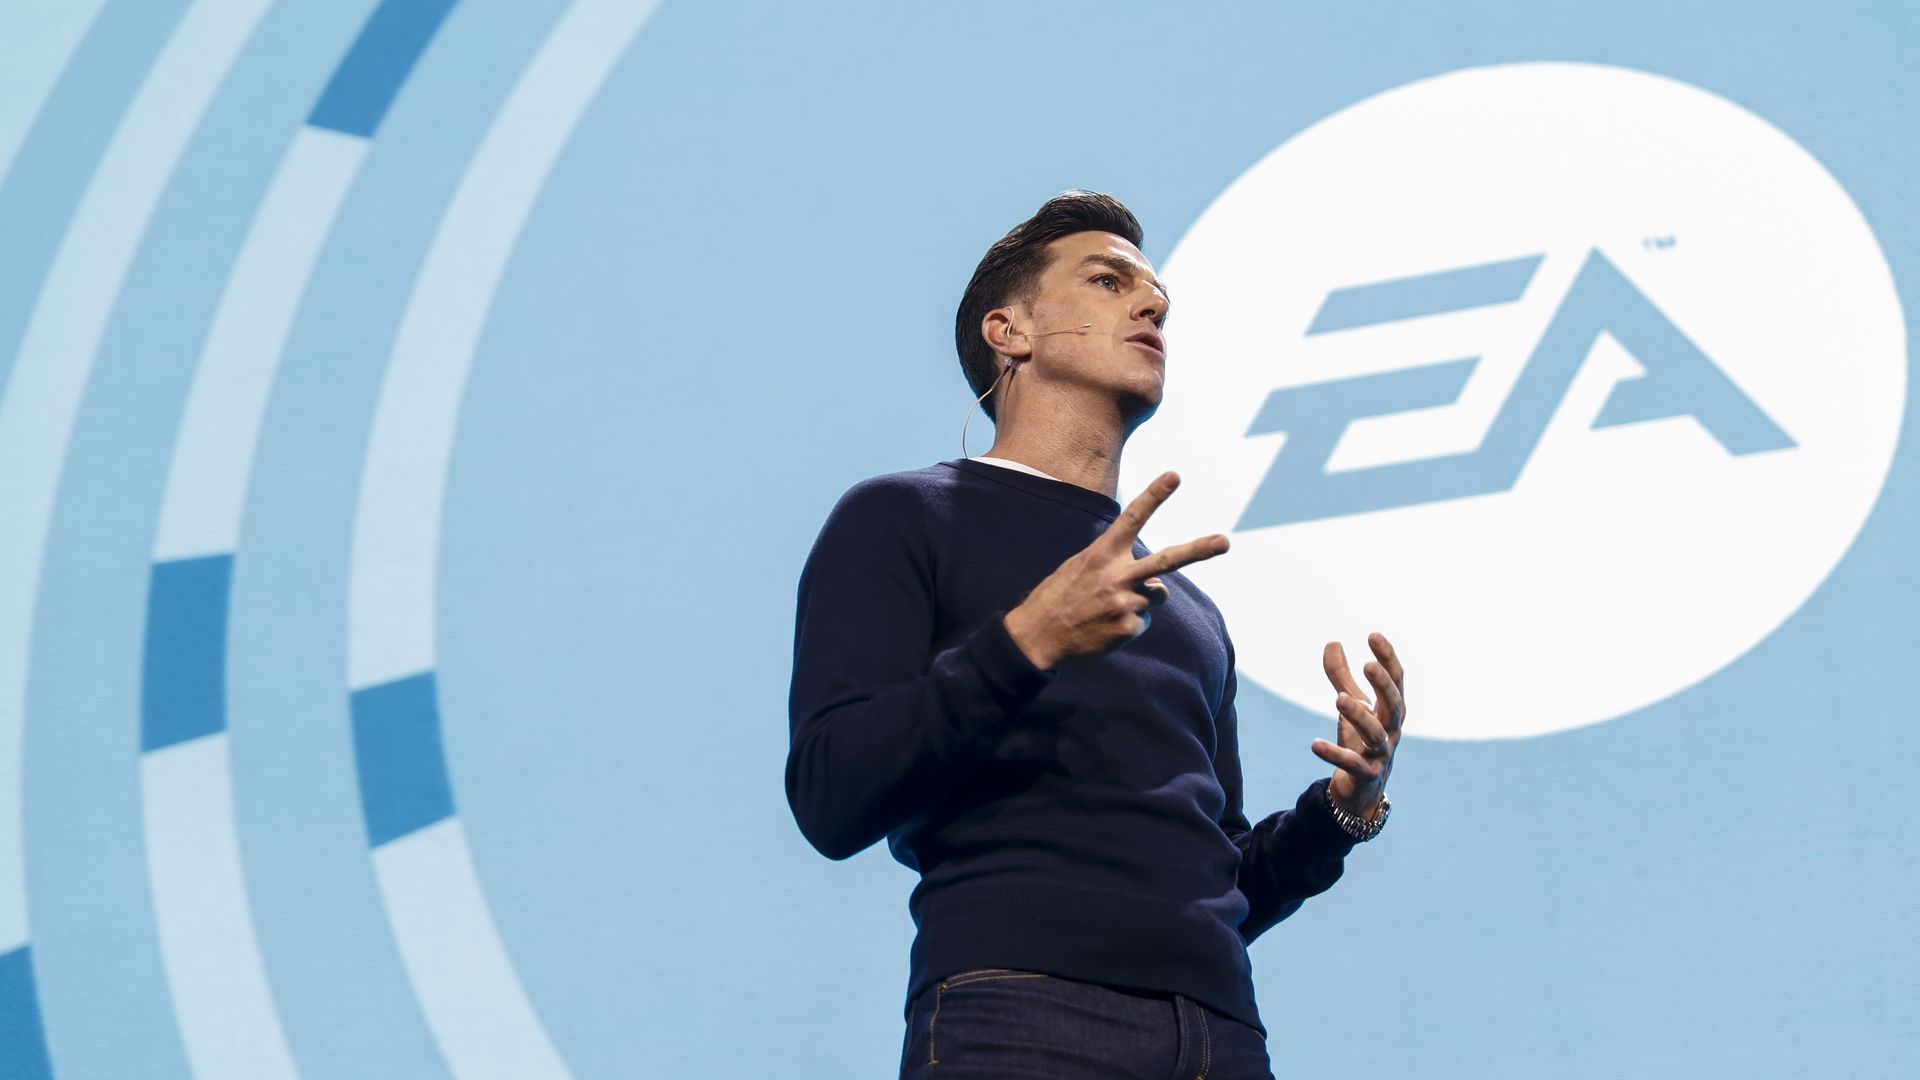 Photo of EA CEO Andrew Wilson in jeans and sweater standing in front of an EA logo